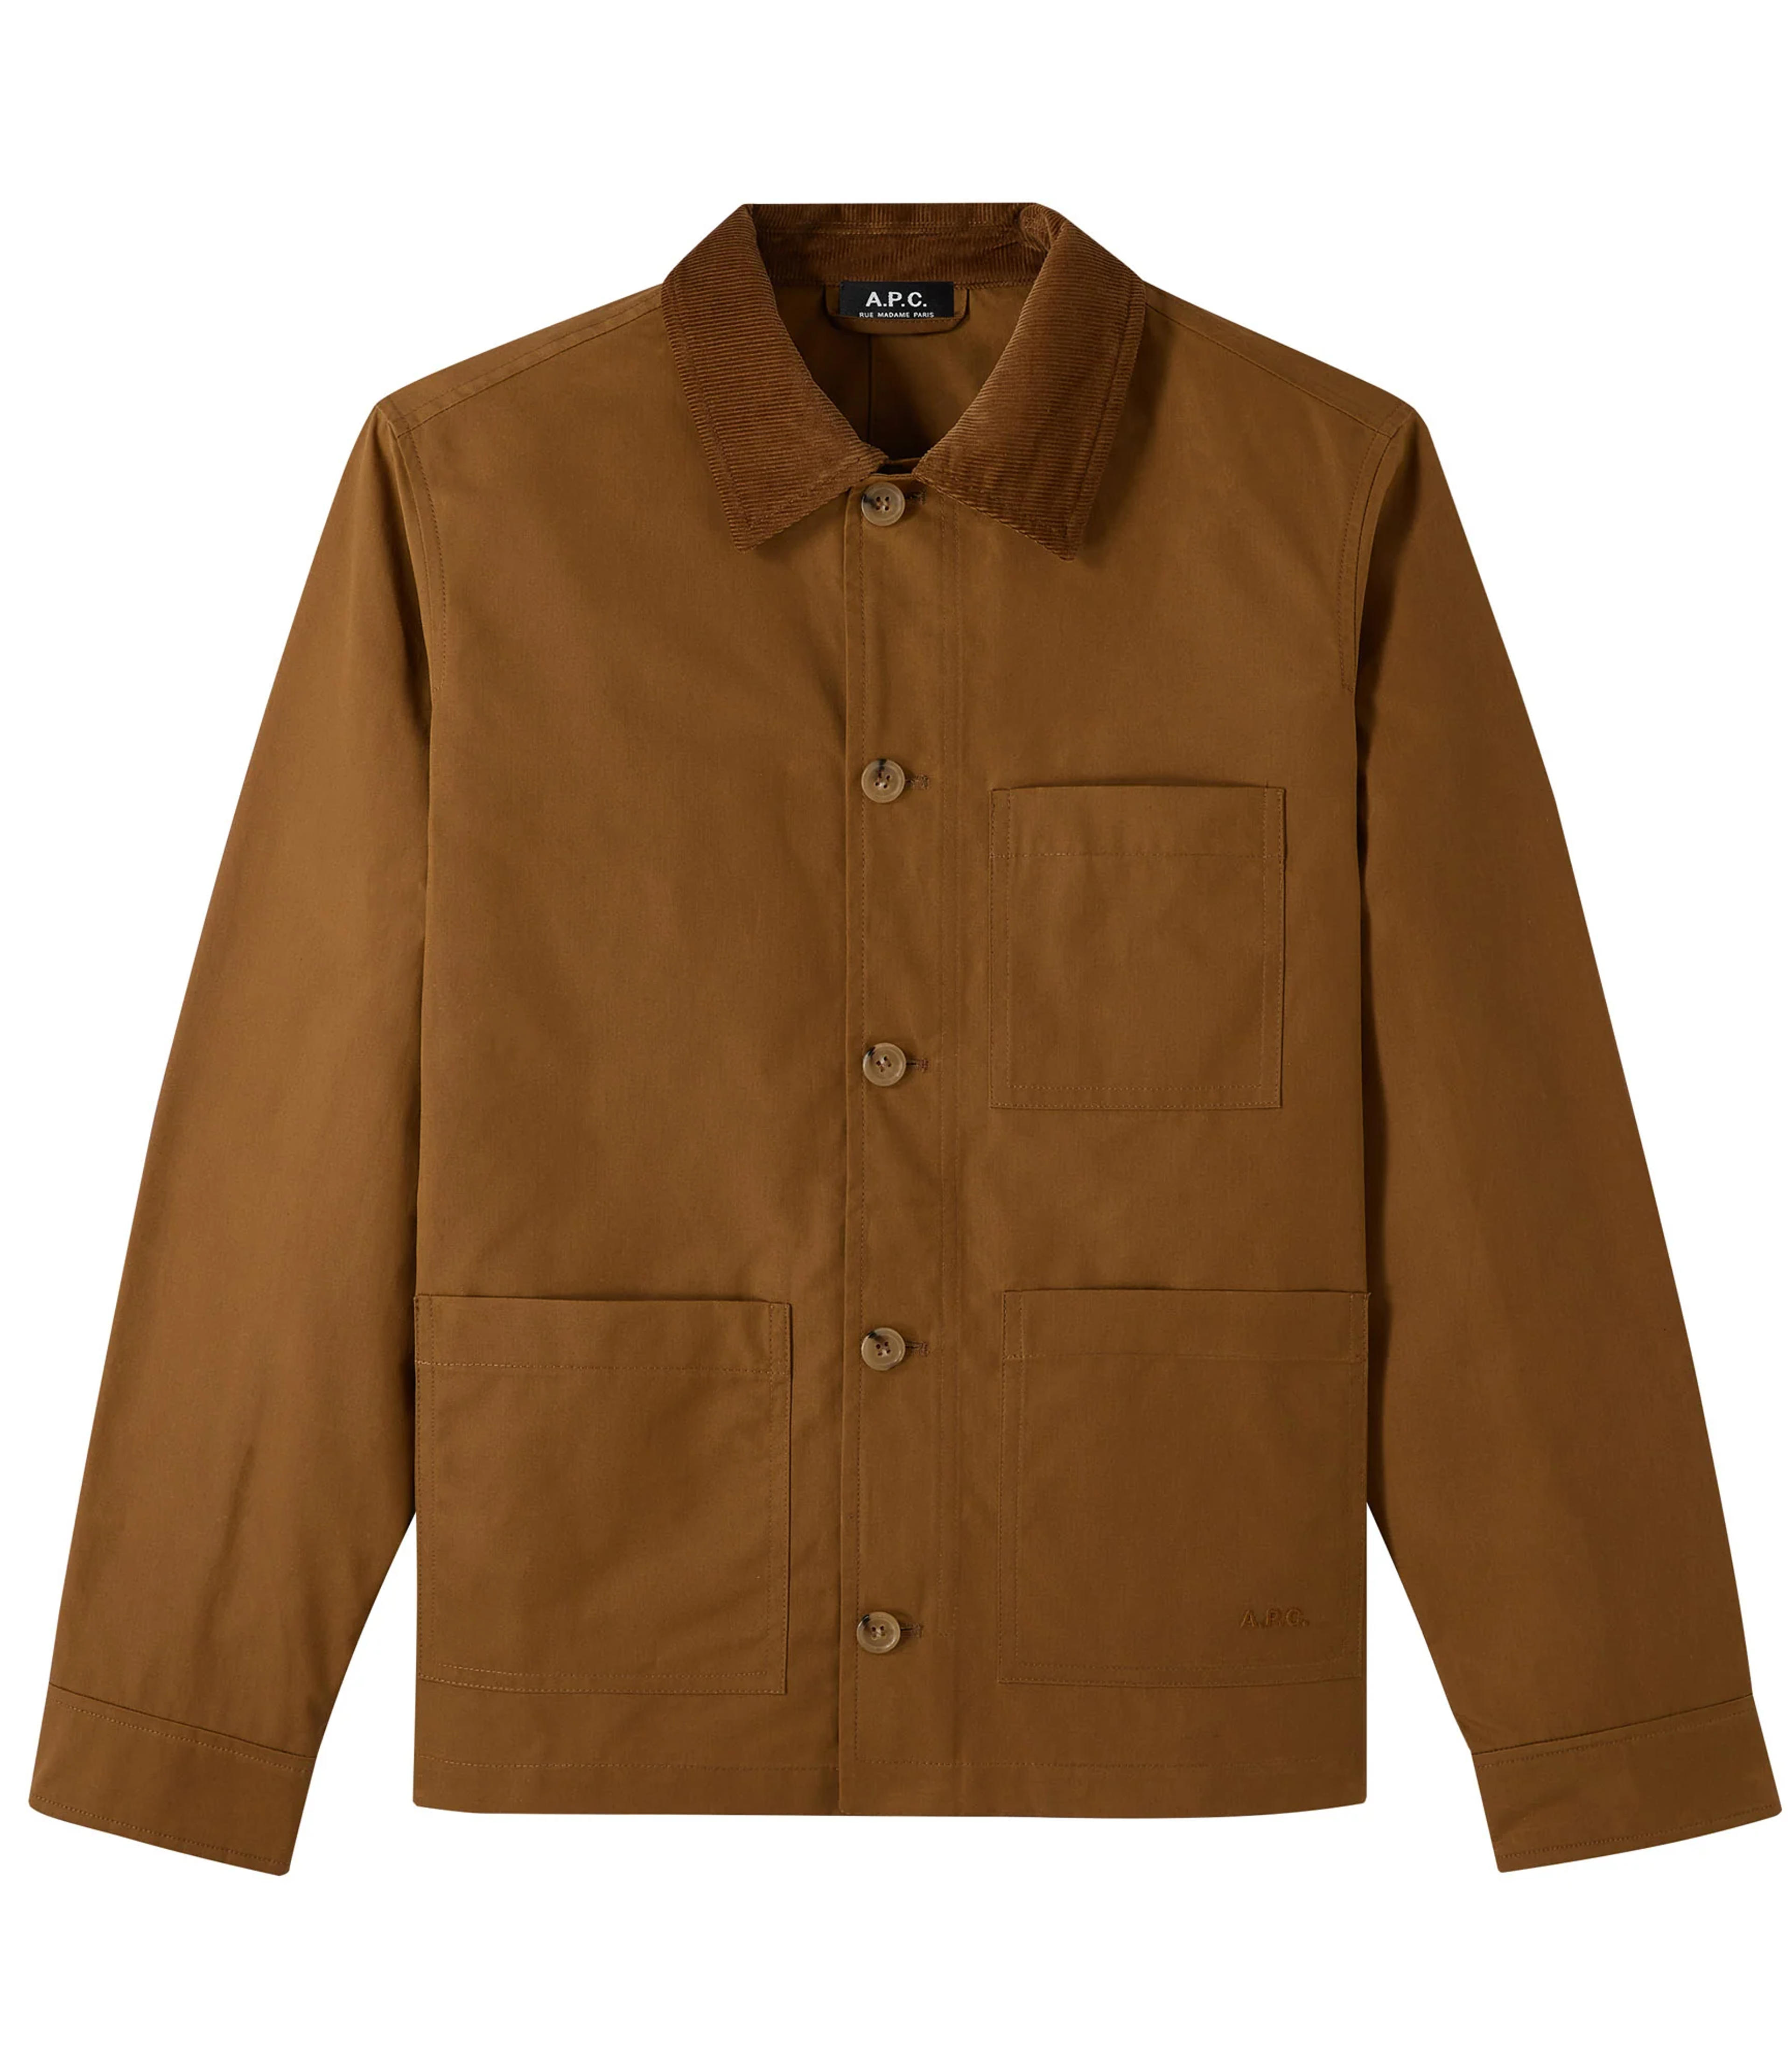 Gabriel jacket | Jacket in water-repellent waxed cotton. | A.P.C. Ready to Wear